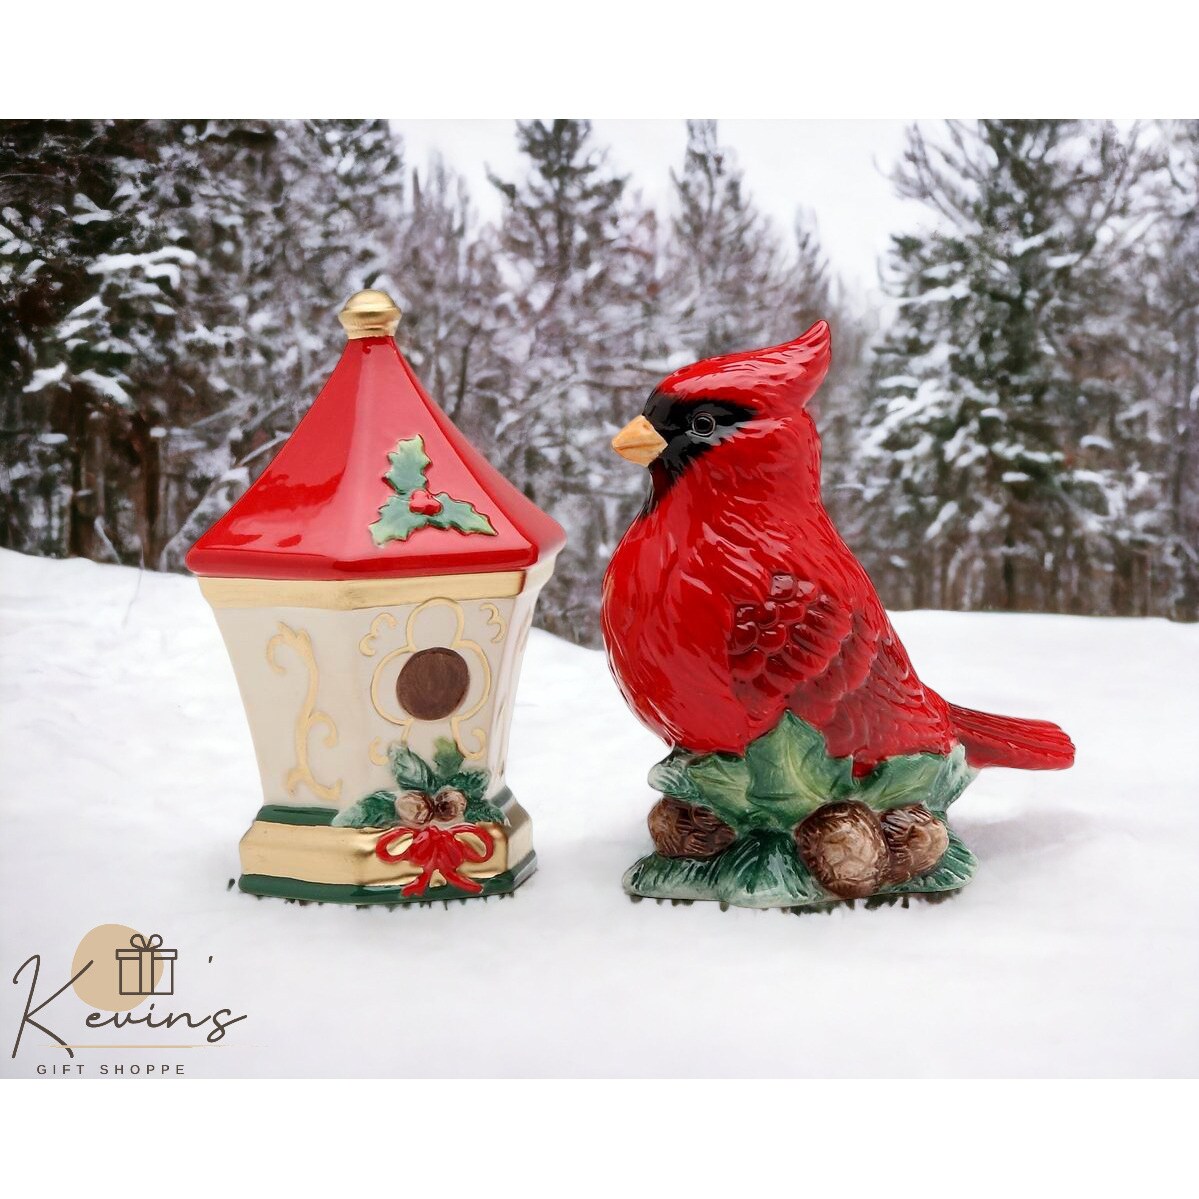 kevinsgiftshoppe Ceramic Cardinal Bird and Bird House Salt and Pepper Shakers   Kitchen Decor